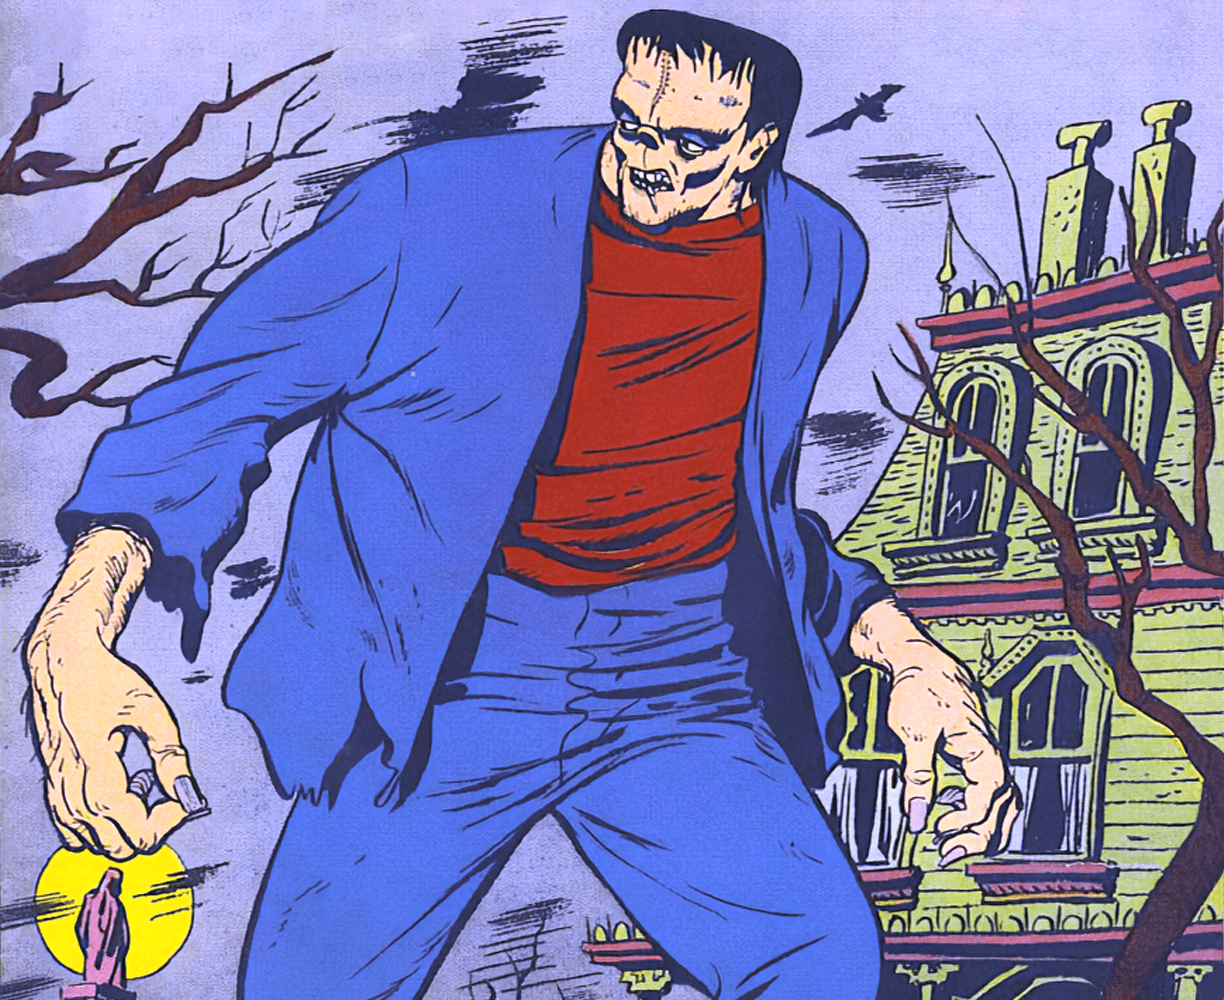 The cover art for the episode The Tomb of the Living Dead 10 from the comics series Frankenstein - The Return, which is number 32 in the series